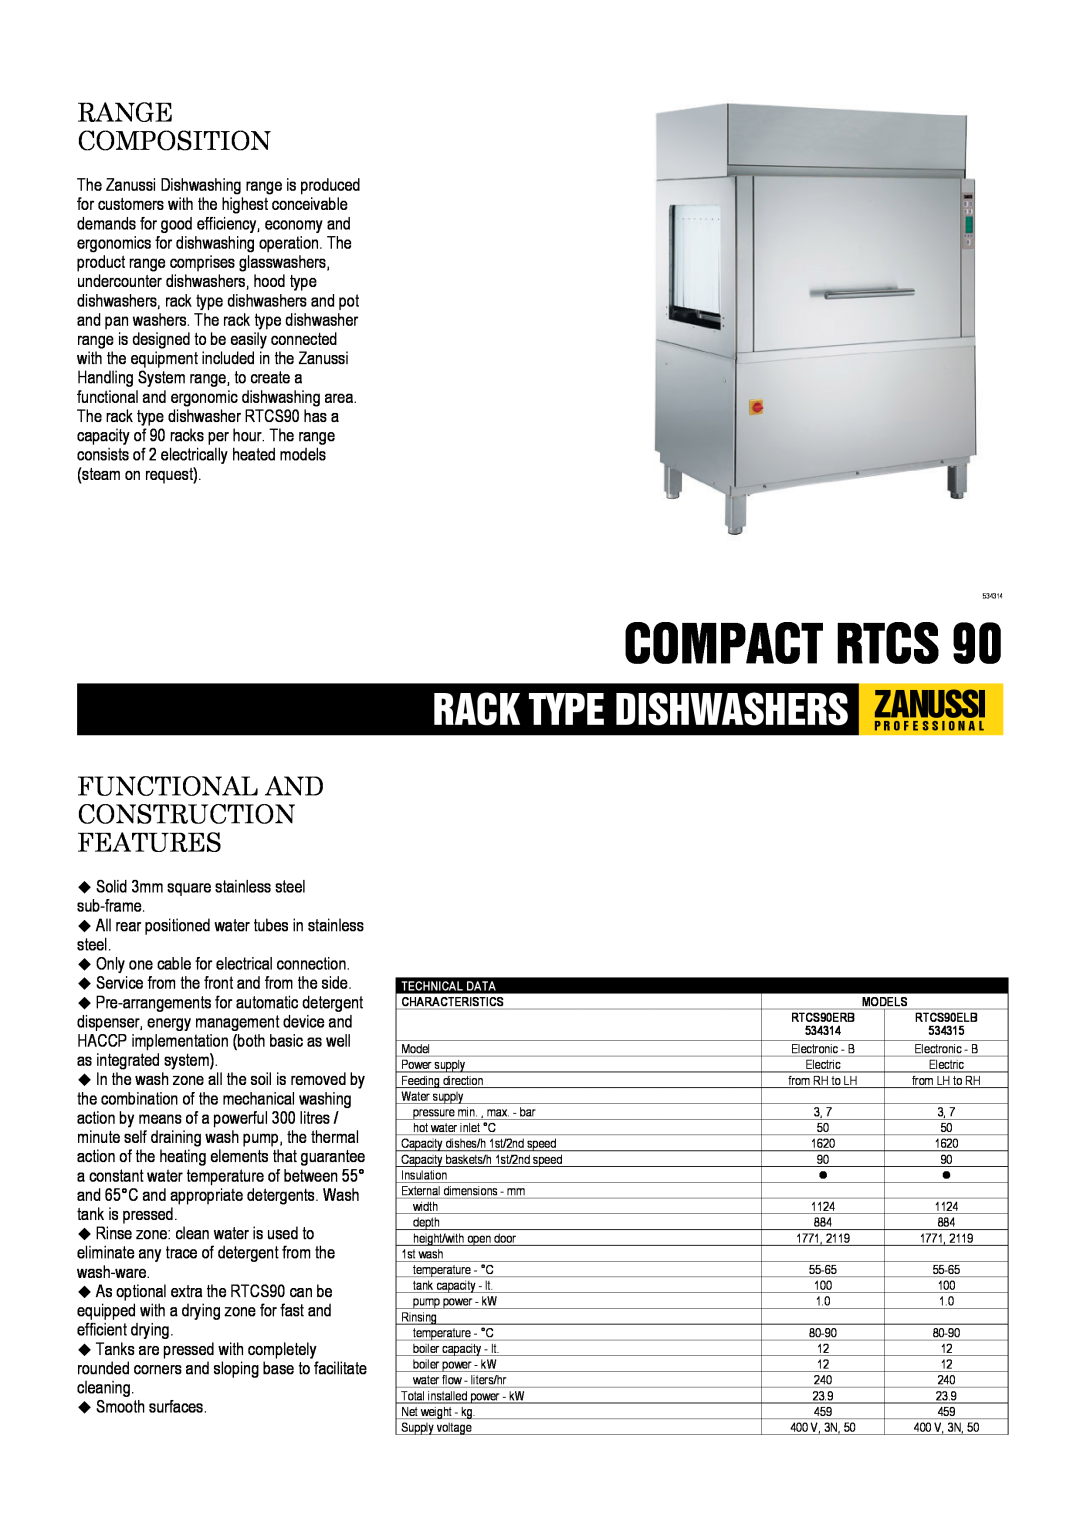 Zanussi RTCS90ELB, RTCS90ERB, 534314 dimensions Compact Rtcs, Range Composition, Functional And Construction Features 